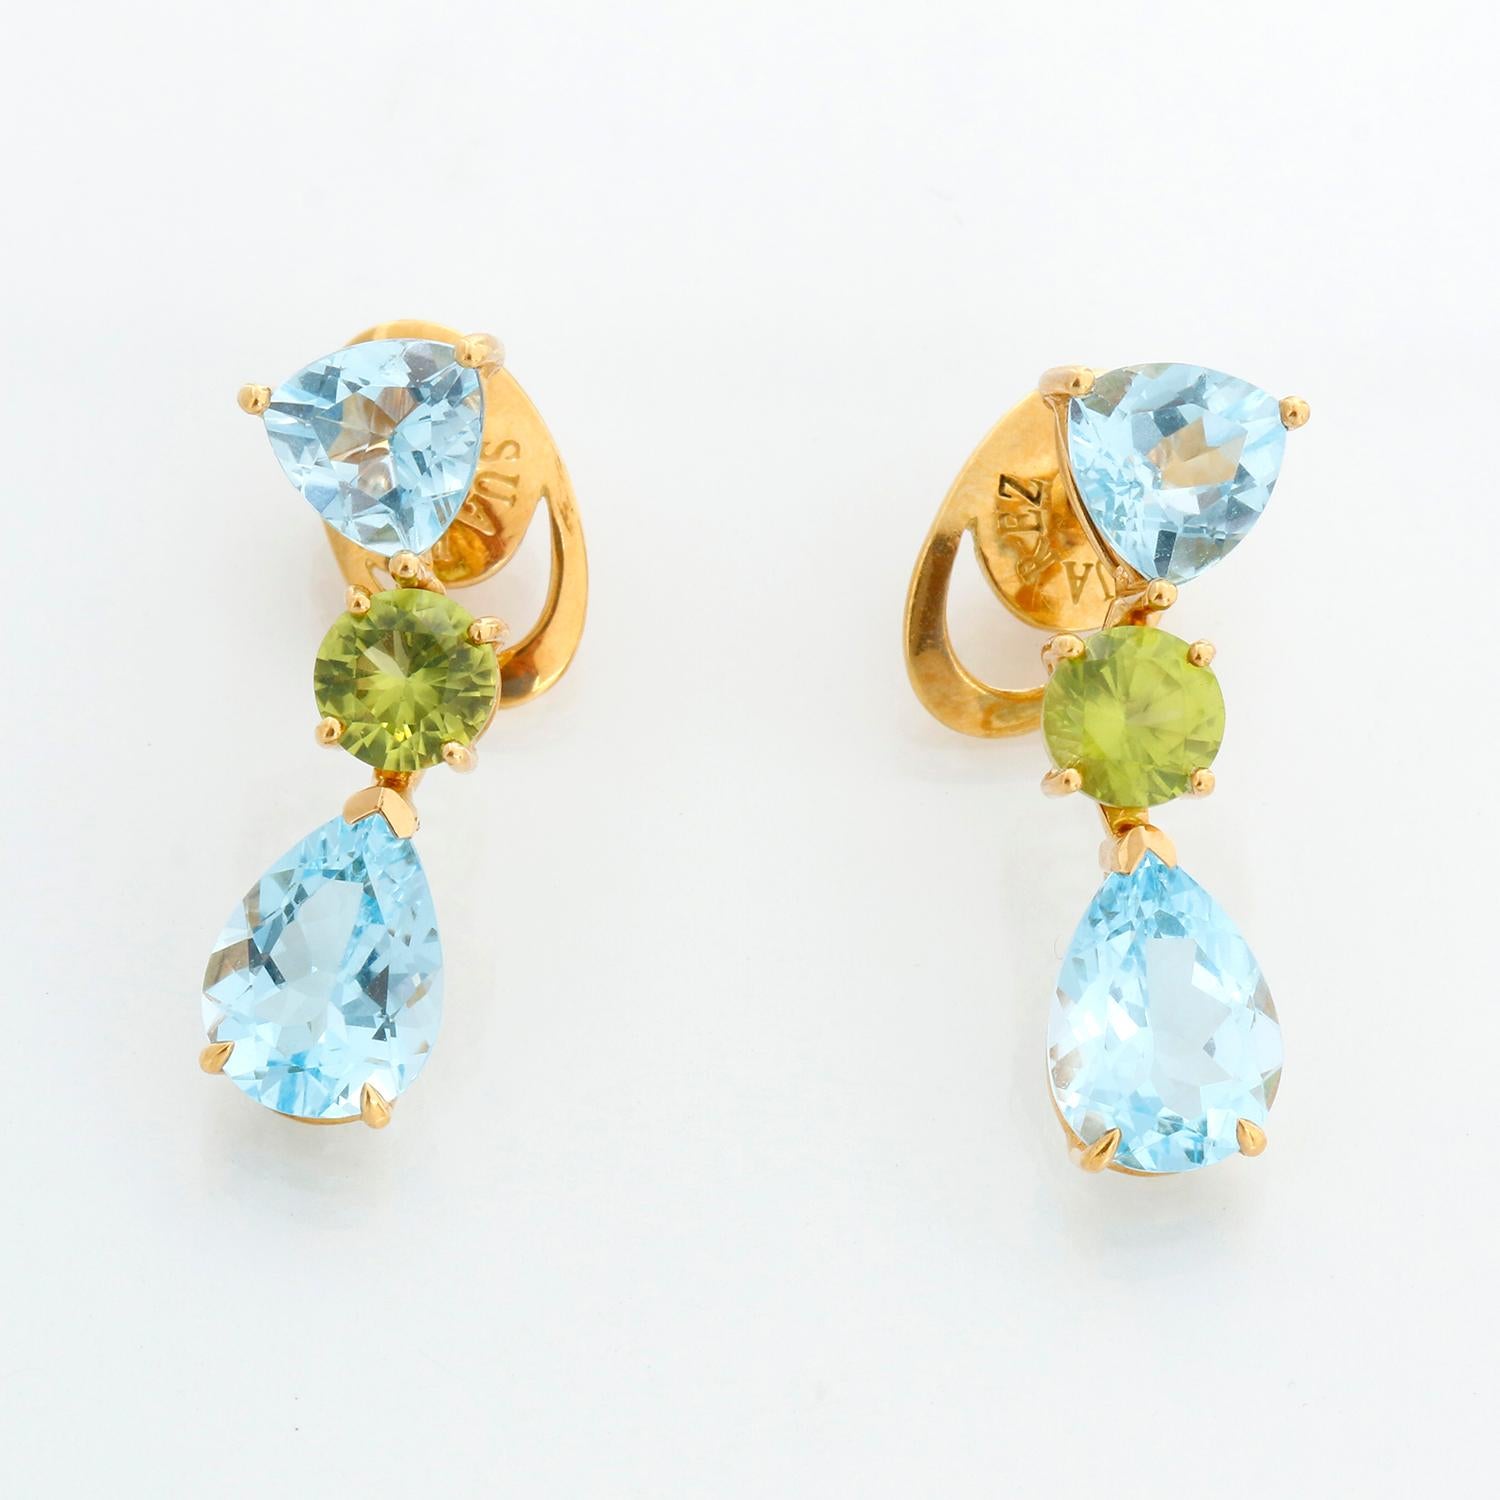 Suarez 18K Yellow Gold Blue Topaz & Peridot Earrings - 18K Yellow gold earrings with Topaz & Peridot gemstones. 28 mm x 8 mm at widest point. Total weight 7.8 grams. .